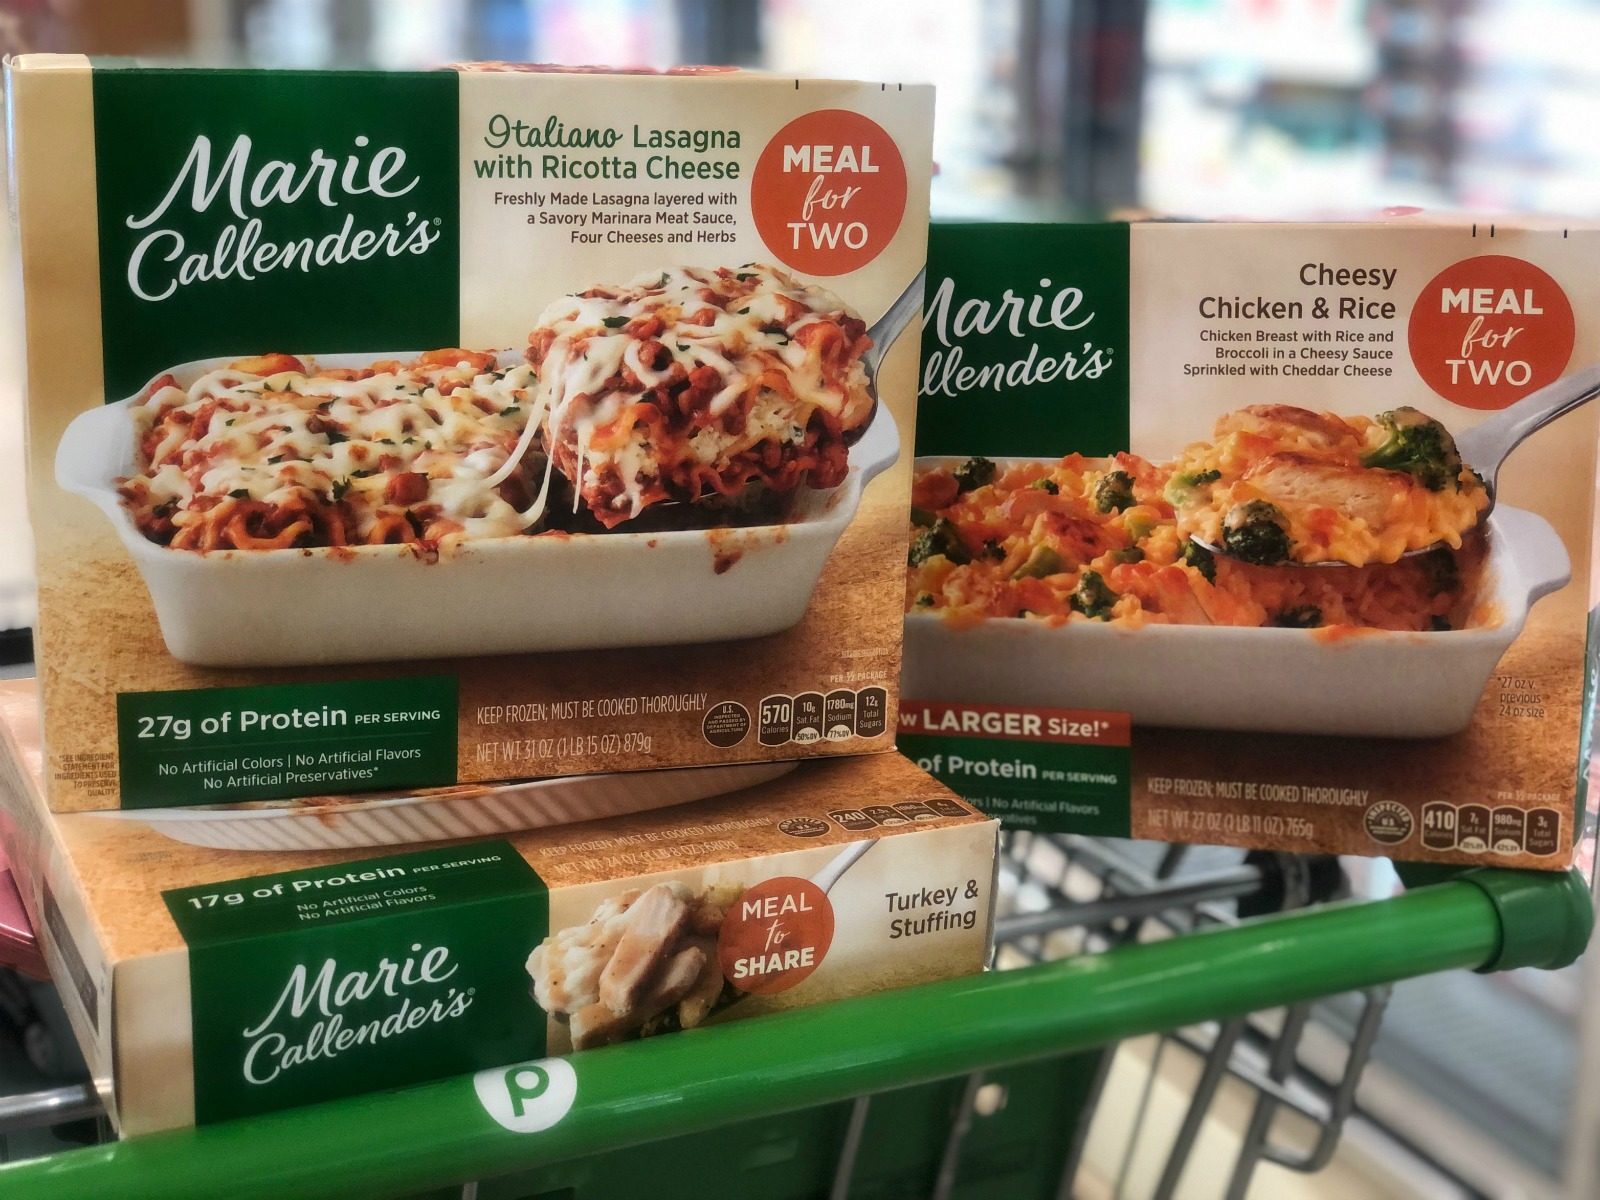 Save On Marie Callender’s Multi-Serve Meals - Six Varieties Available